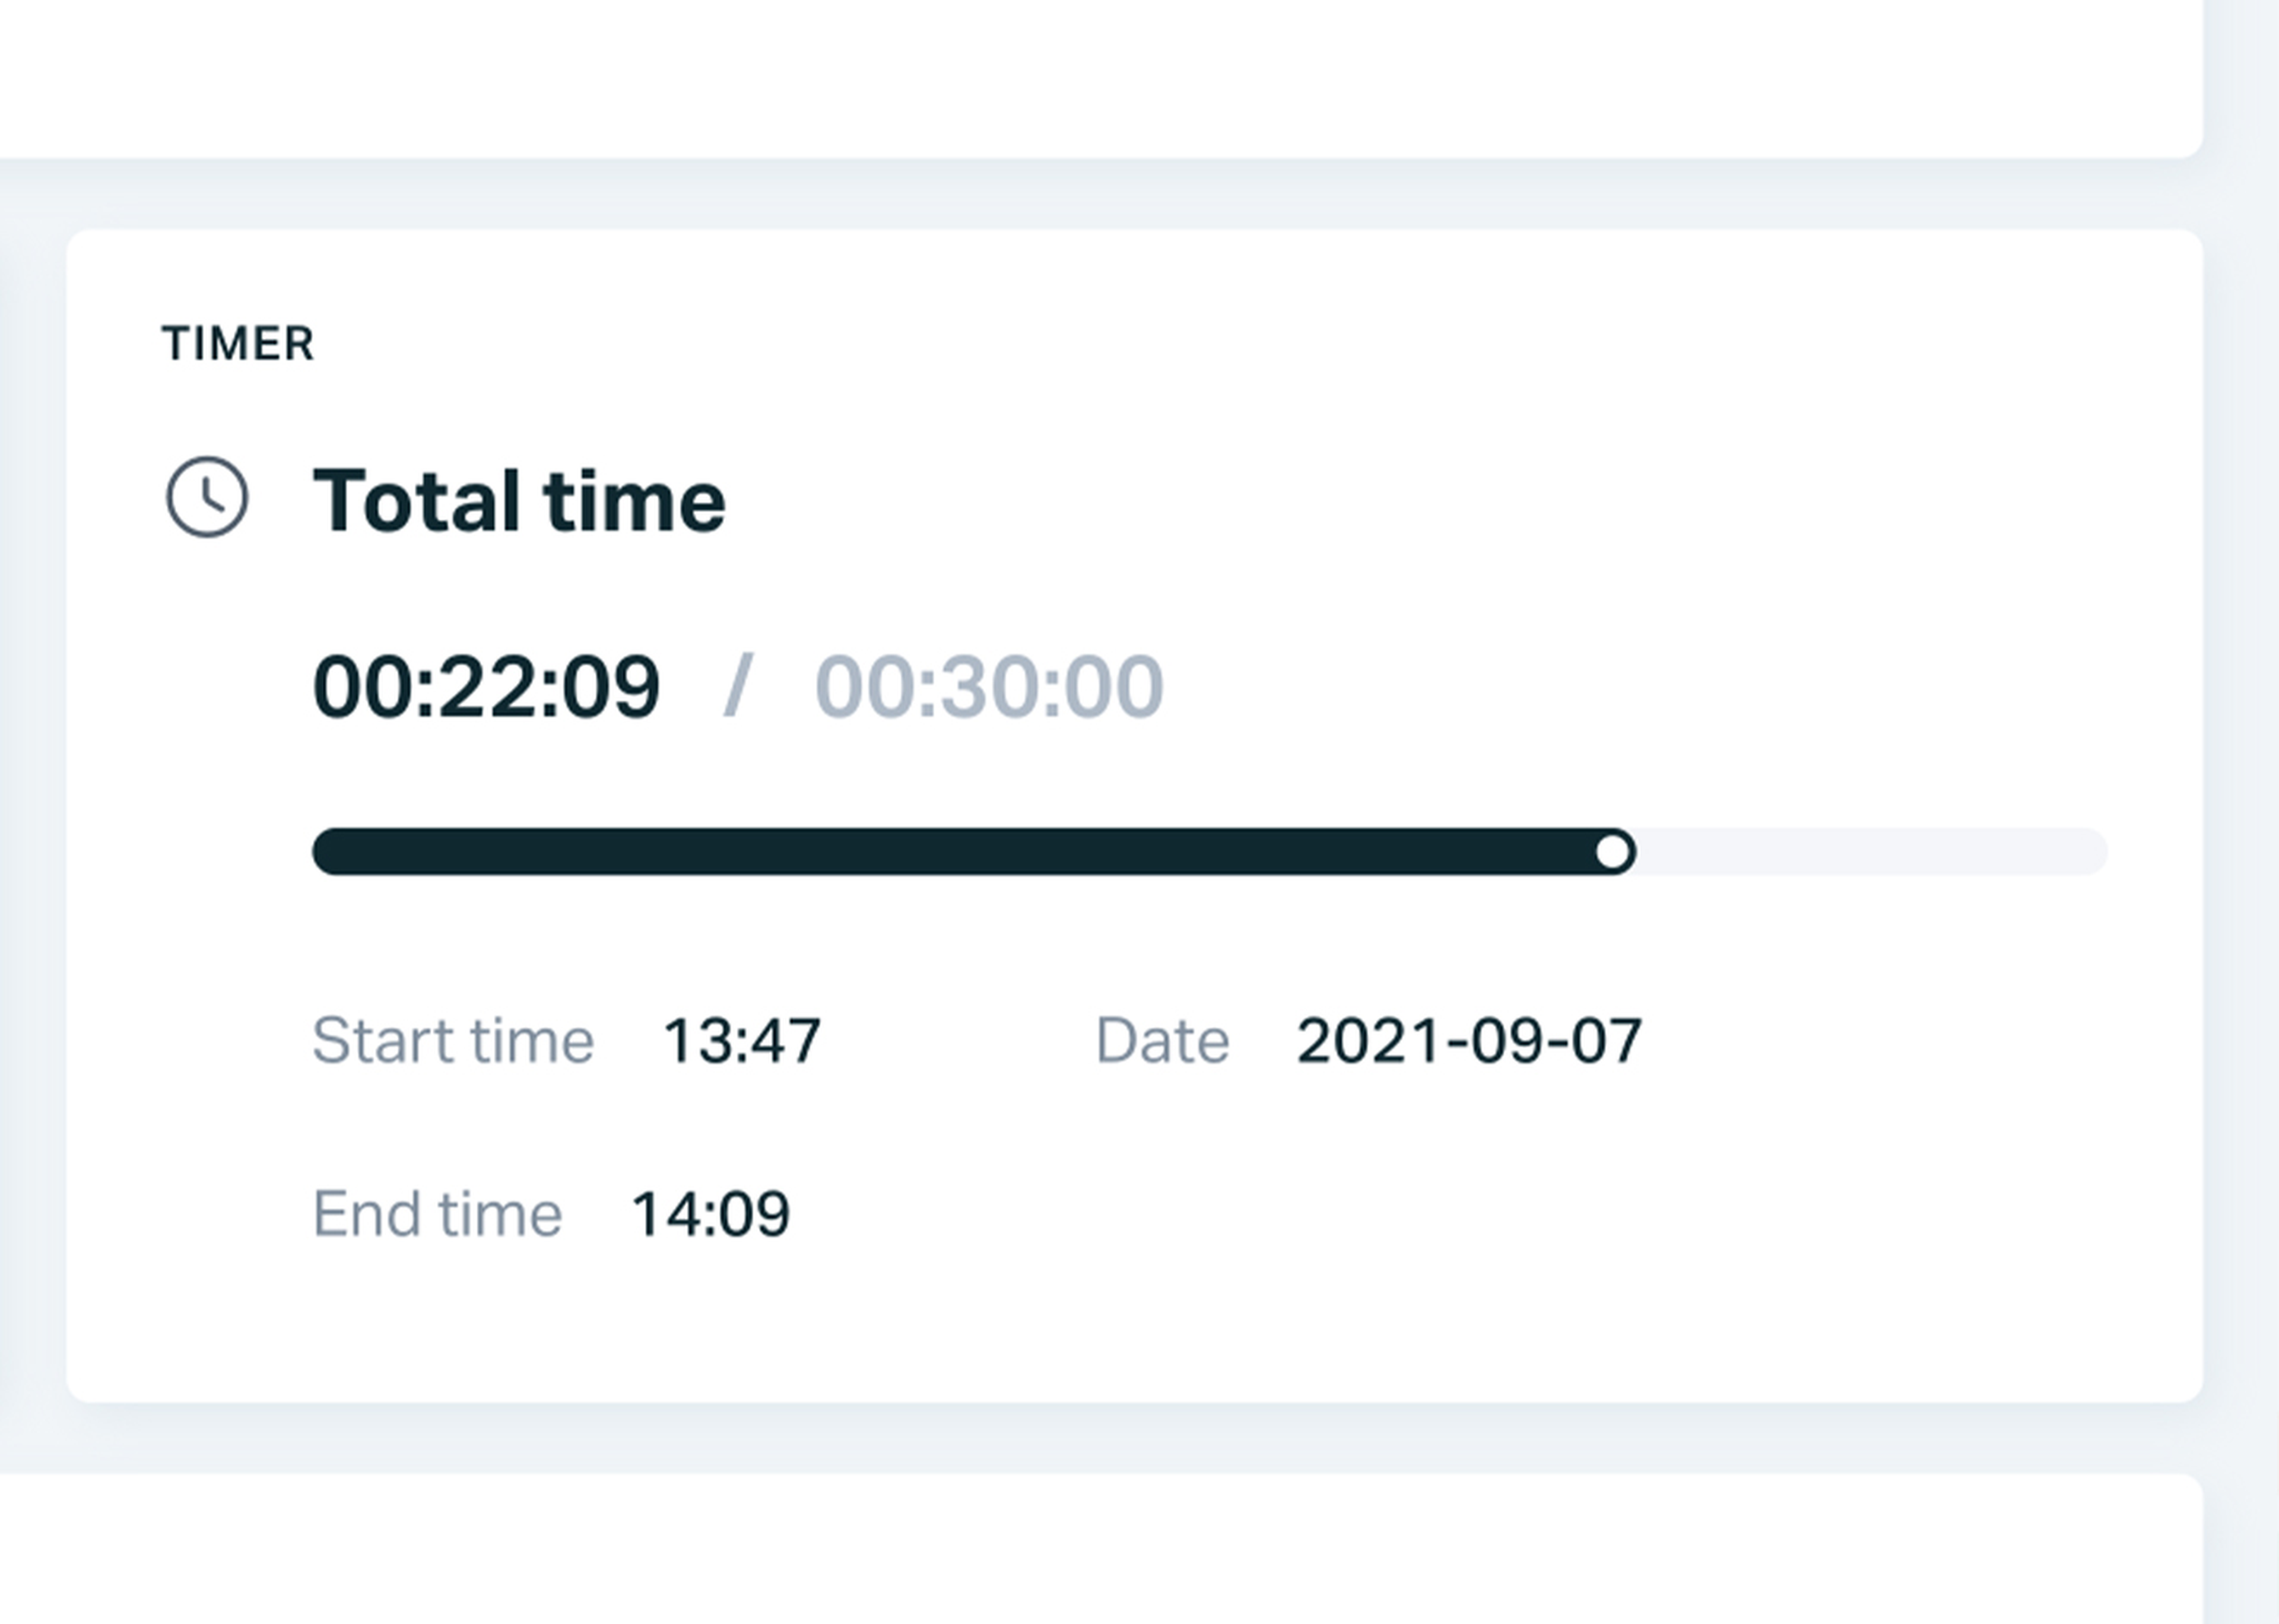   Create online test and track progress over time